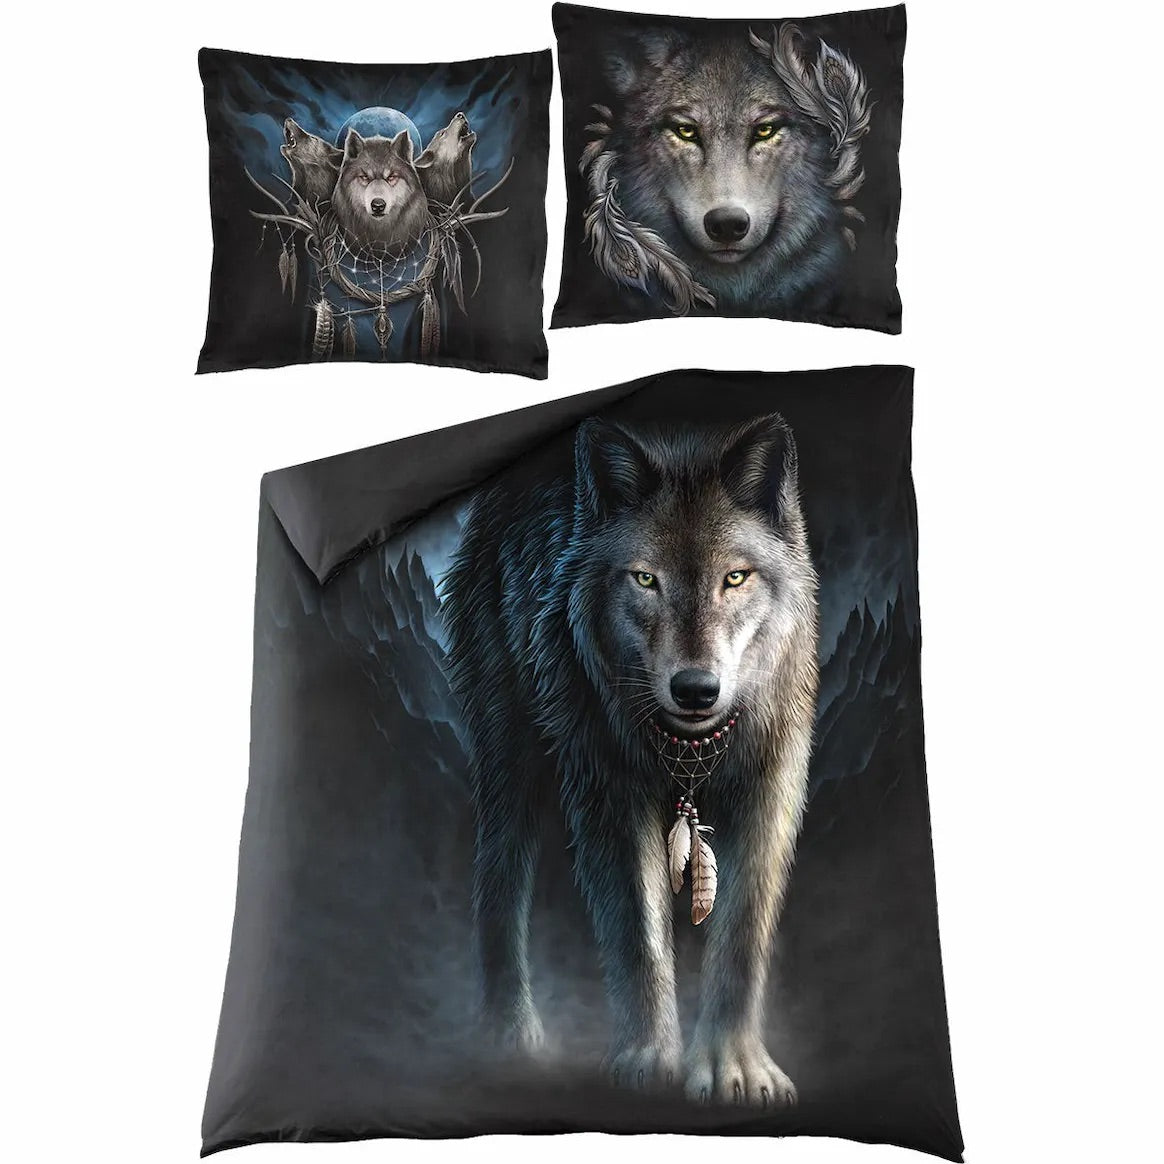 FROM DARKNESS - Double Duvet Cover + Uk And Eu Pillow Case